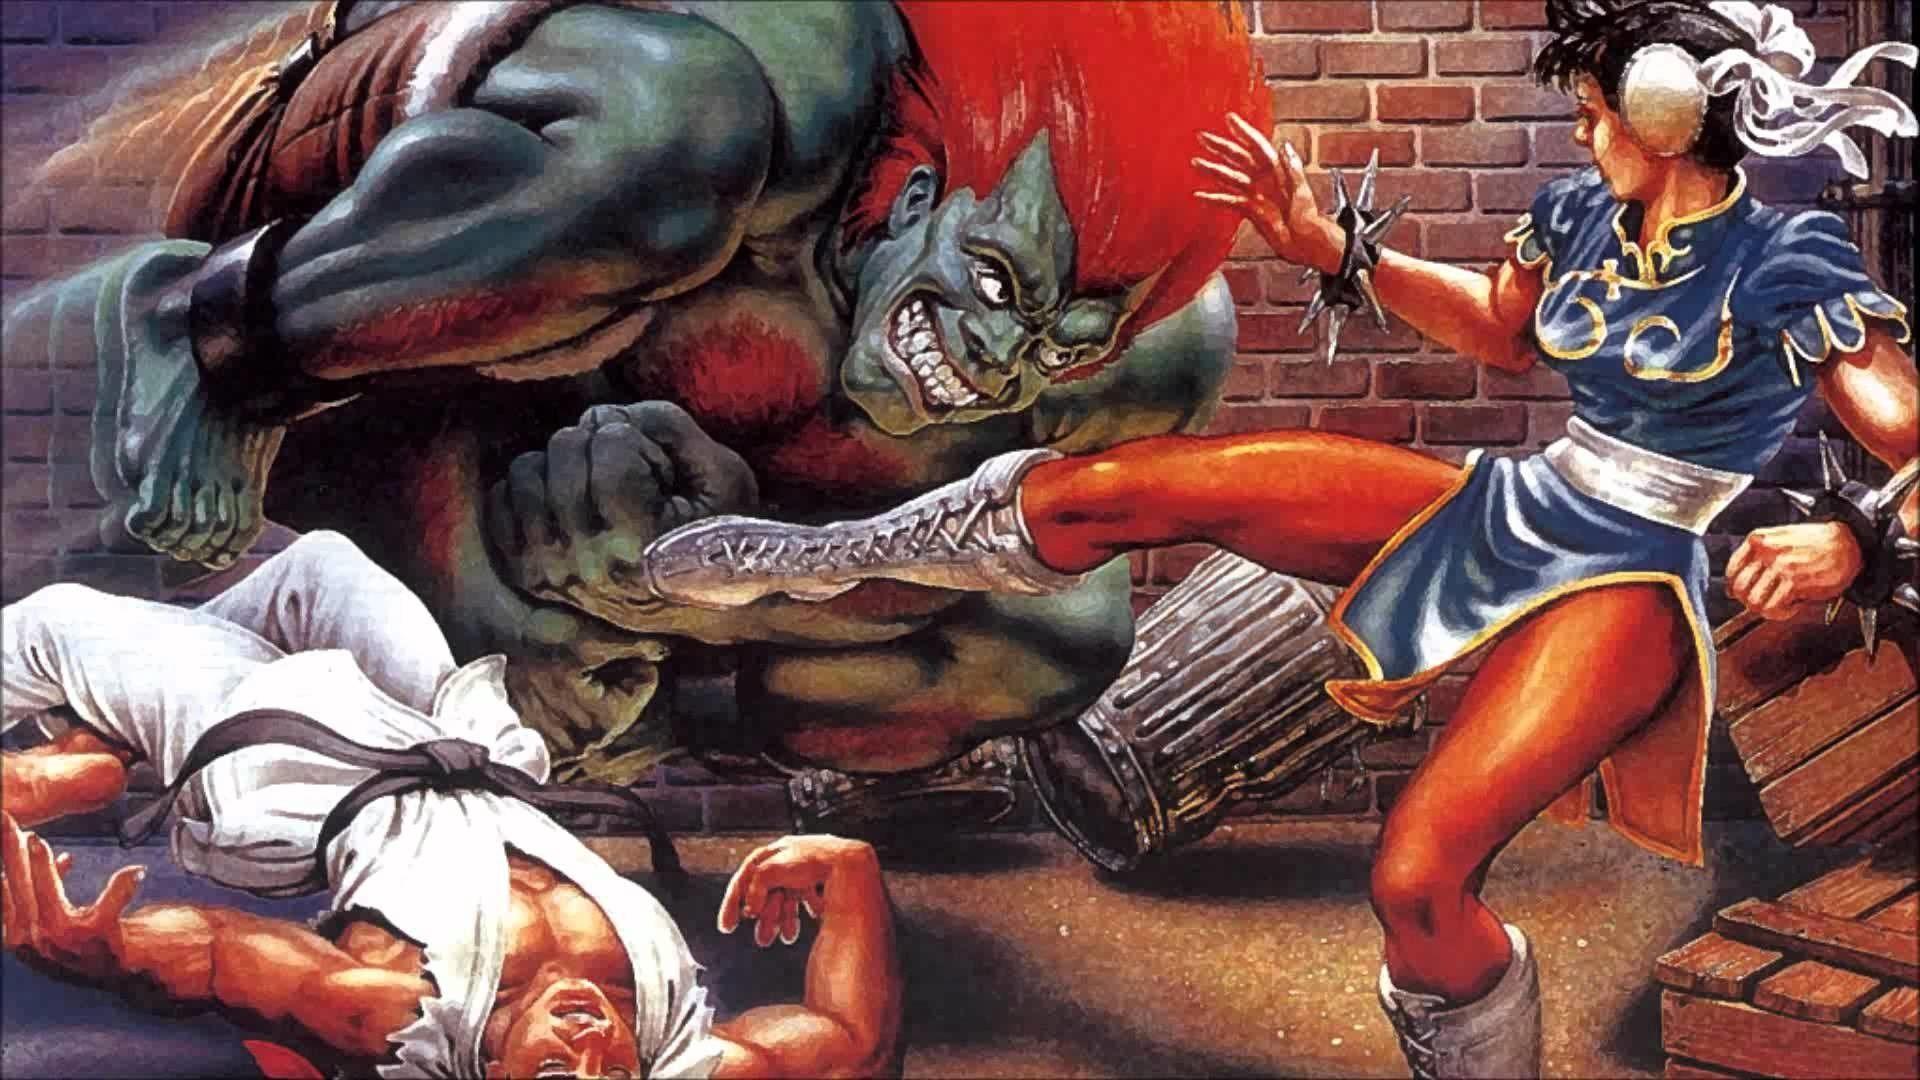 Street Fighter on X: Akuma made his first appearance back in 1994